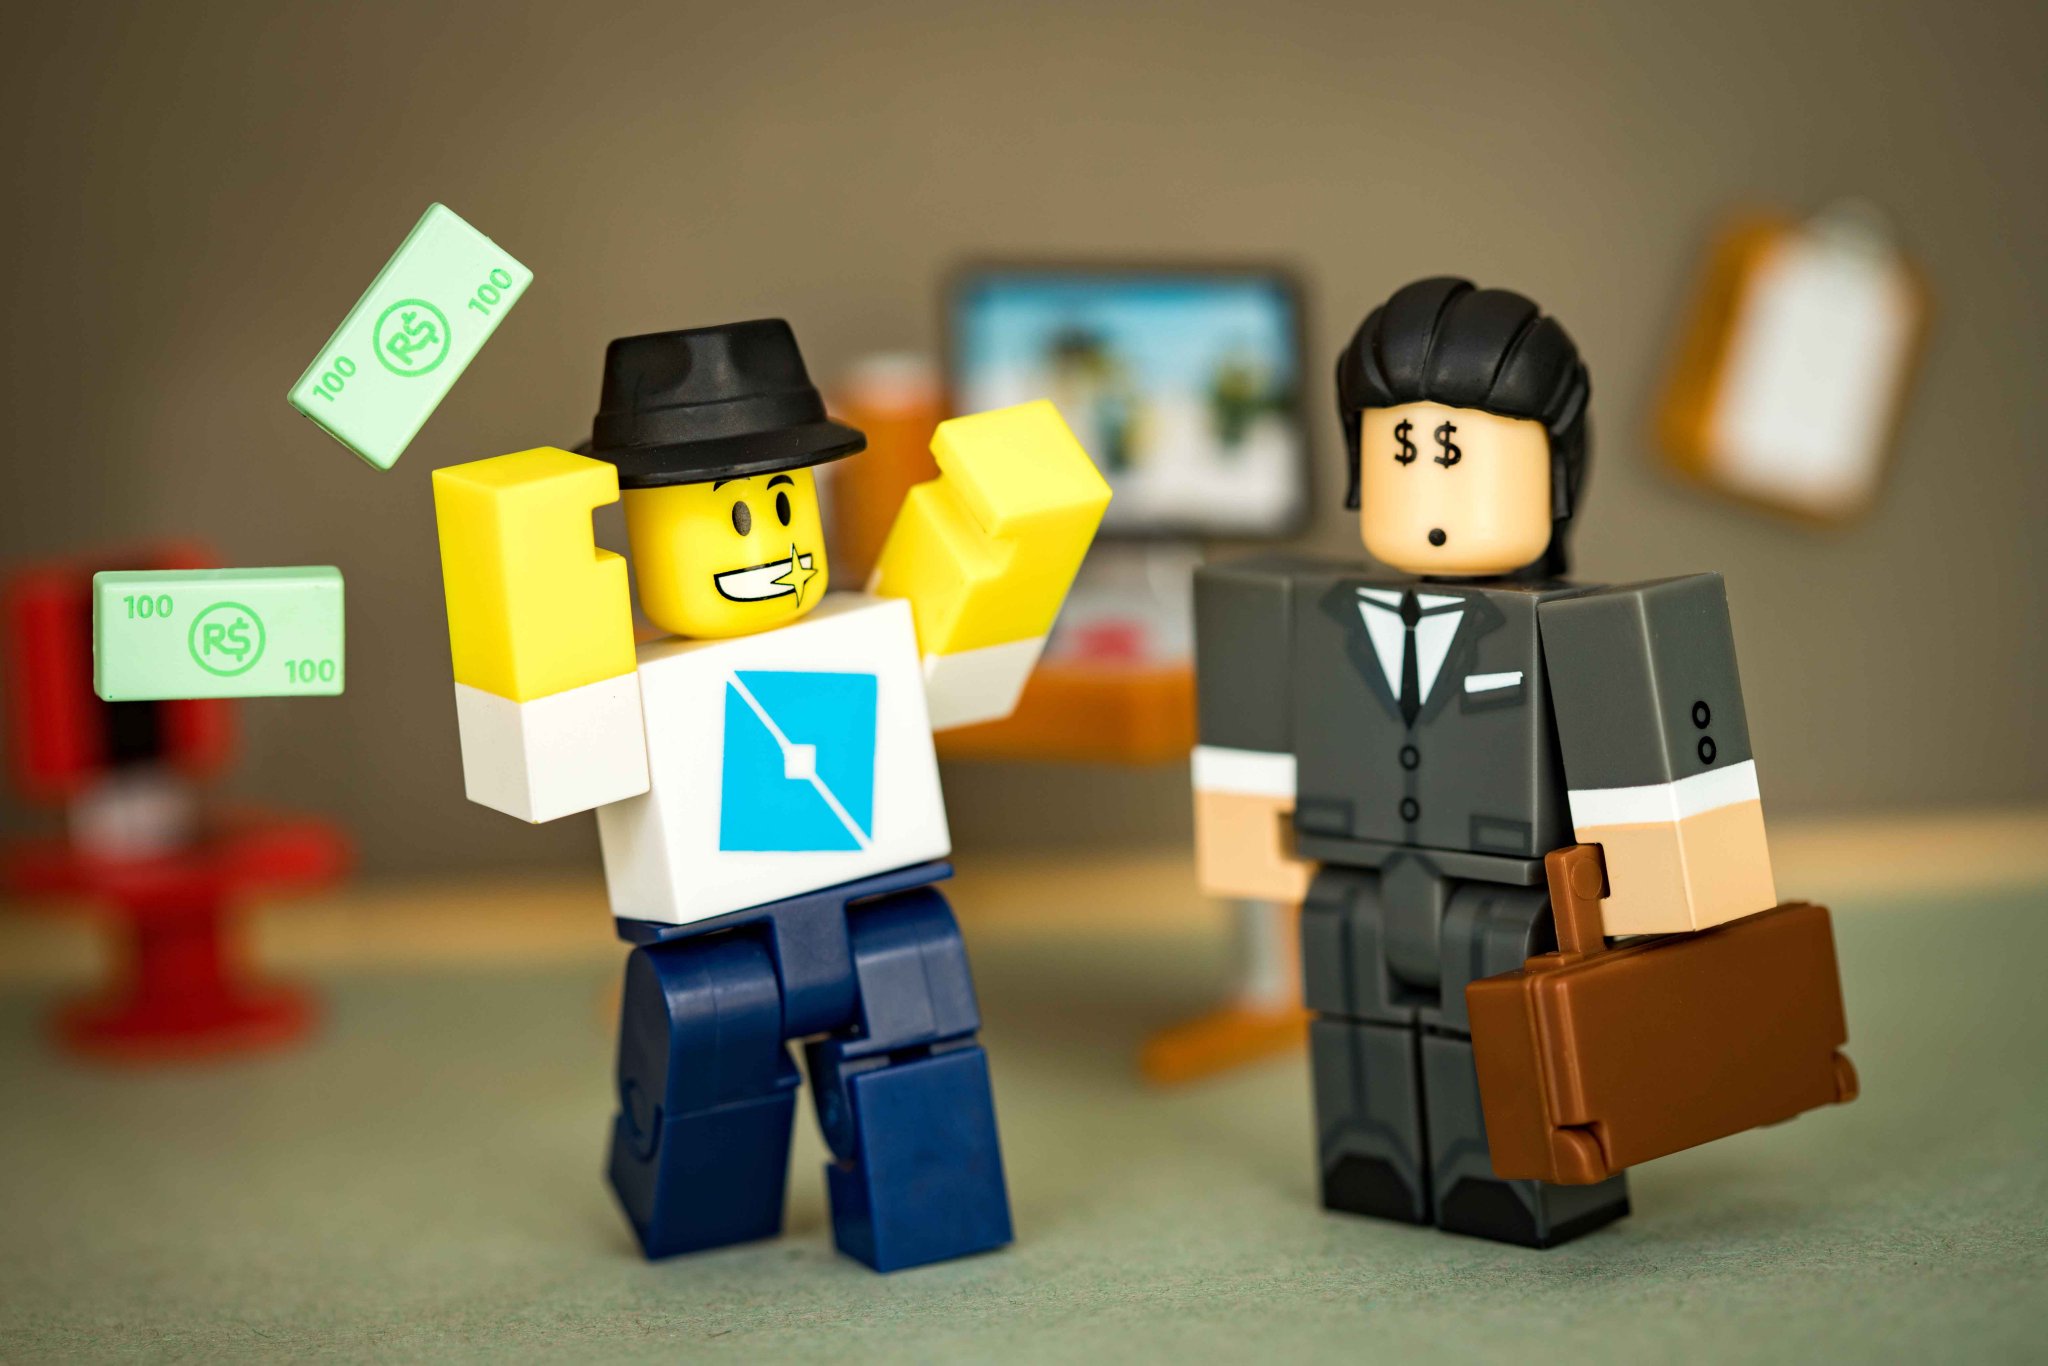 John Shedletsky And 3 154 054 Others On Twitter Roblox Devlife - coeptus roblox toy